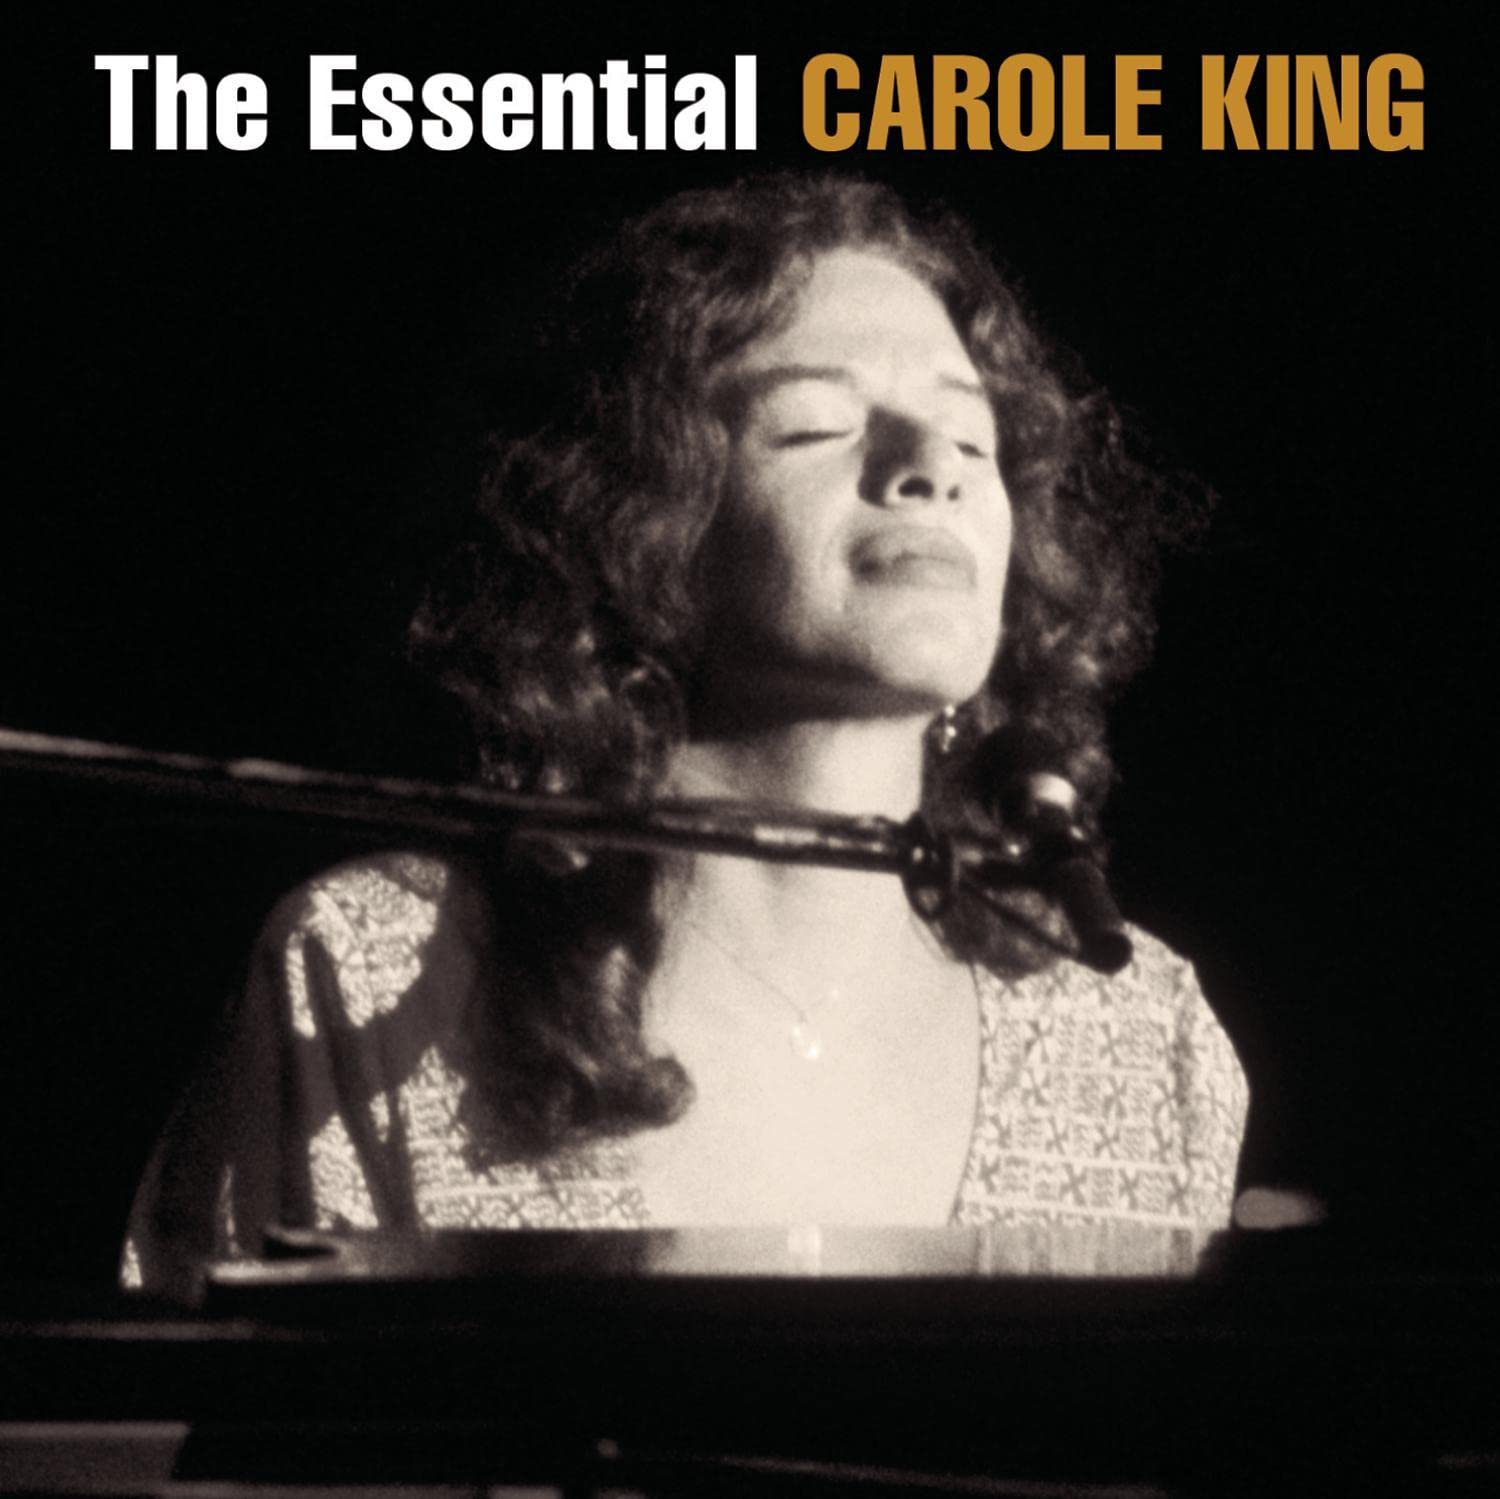 From Brill Building to Global Beacon: Carole King's Musical Journey at 82